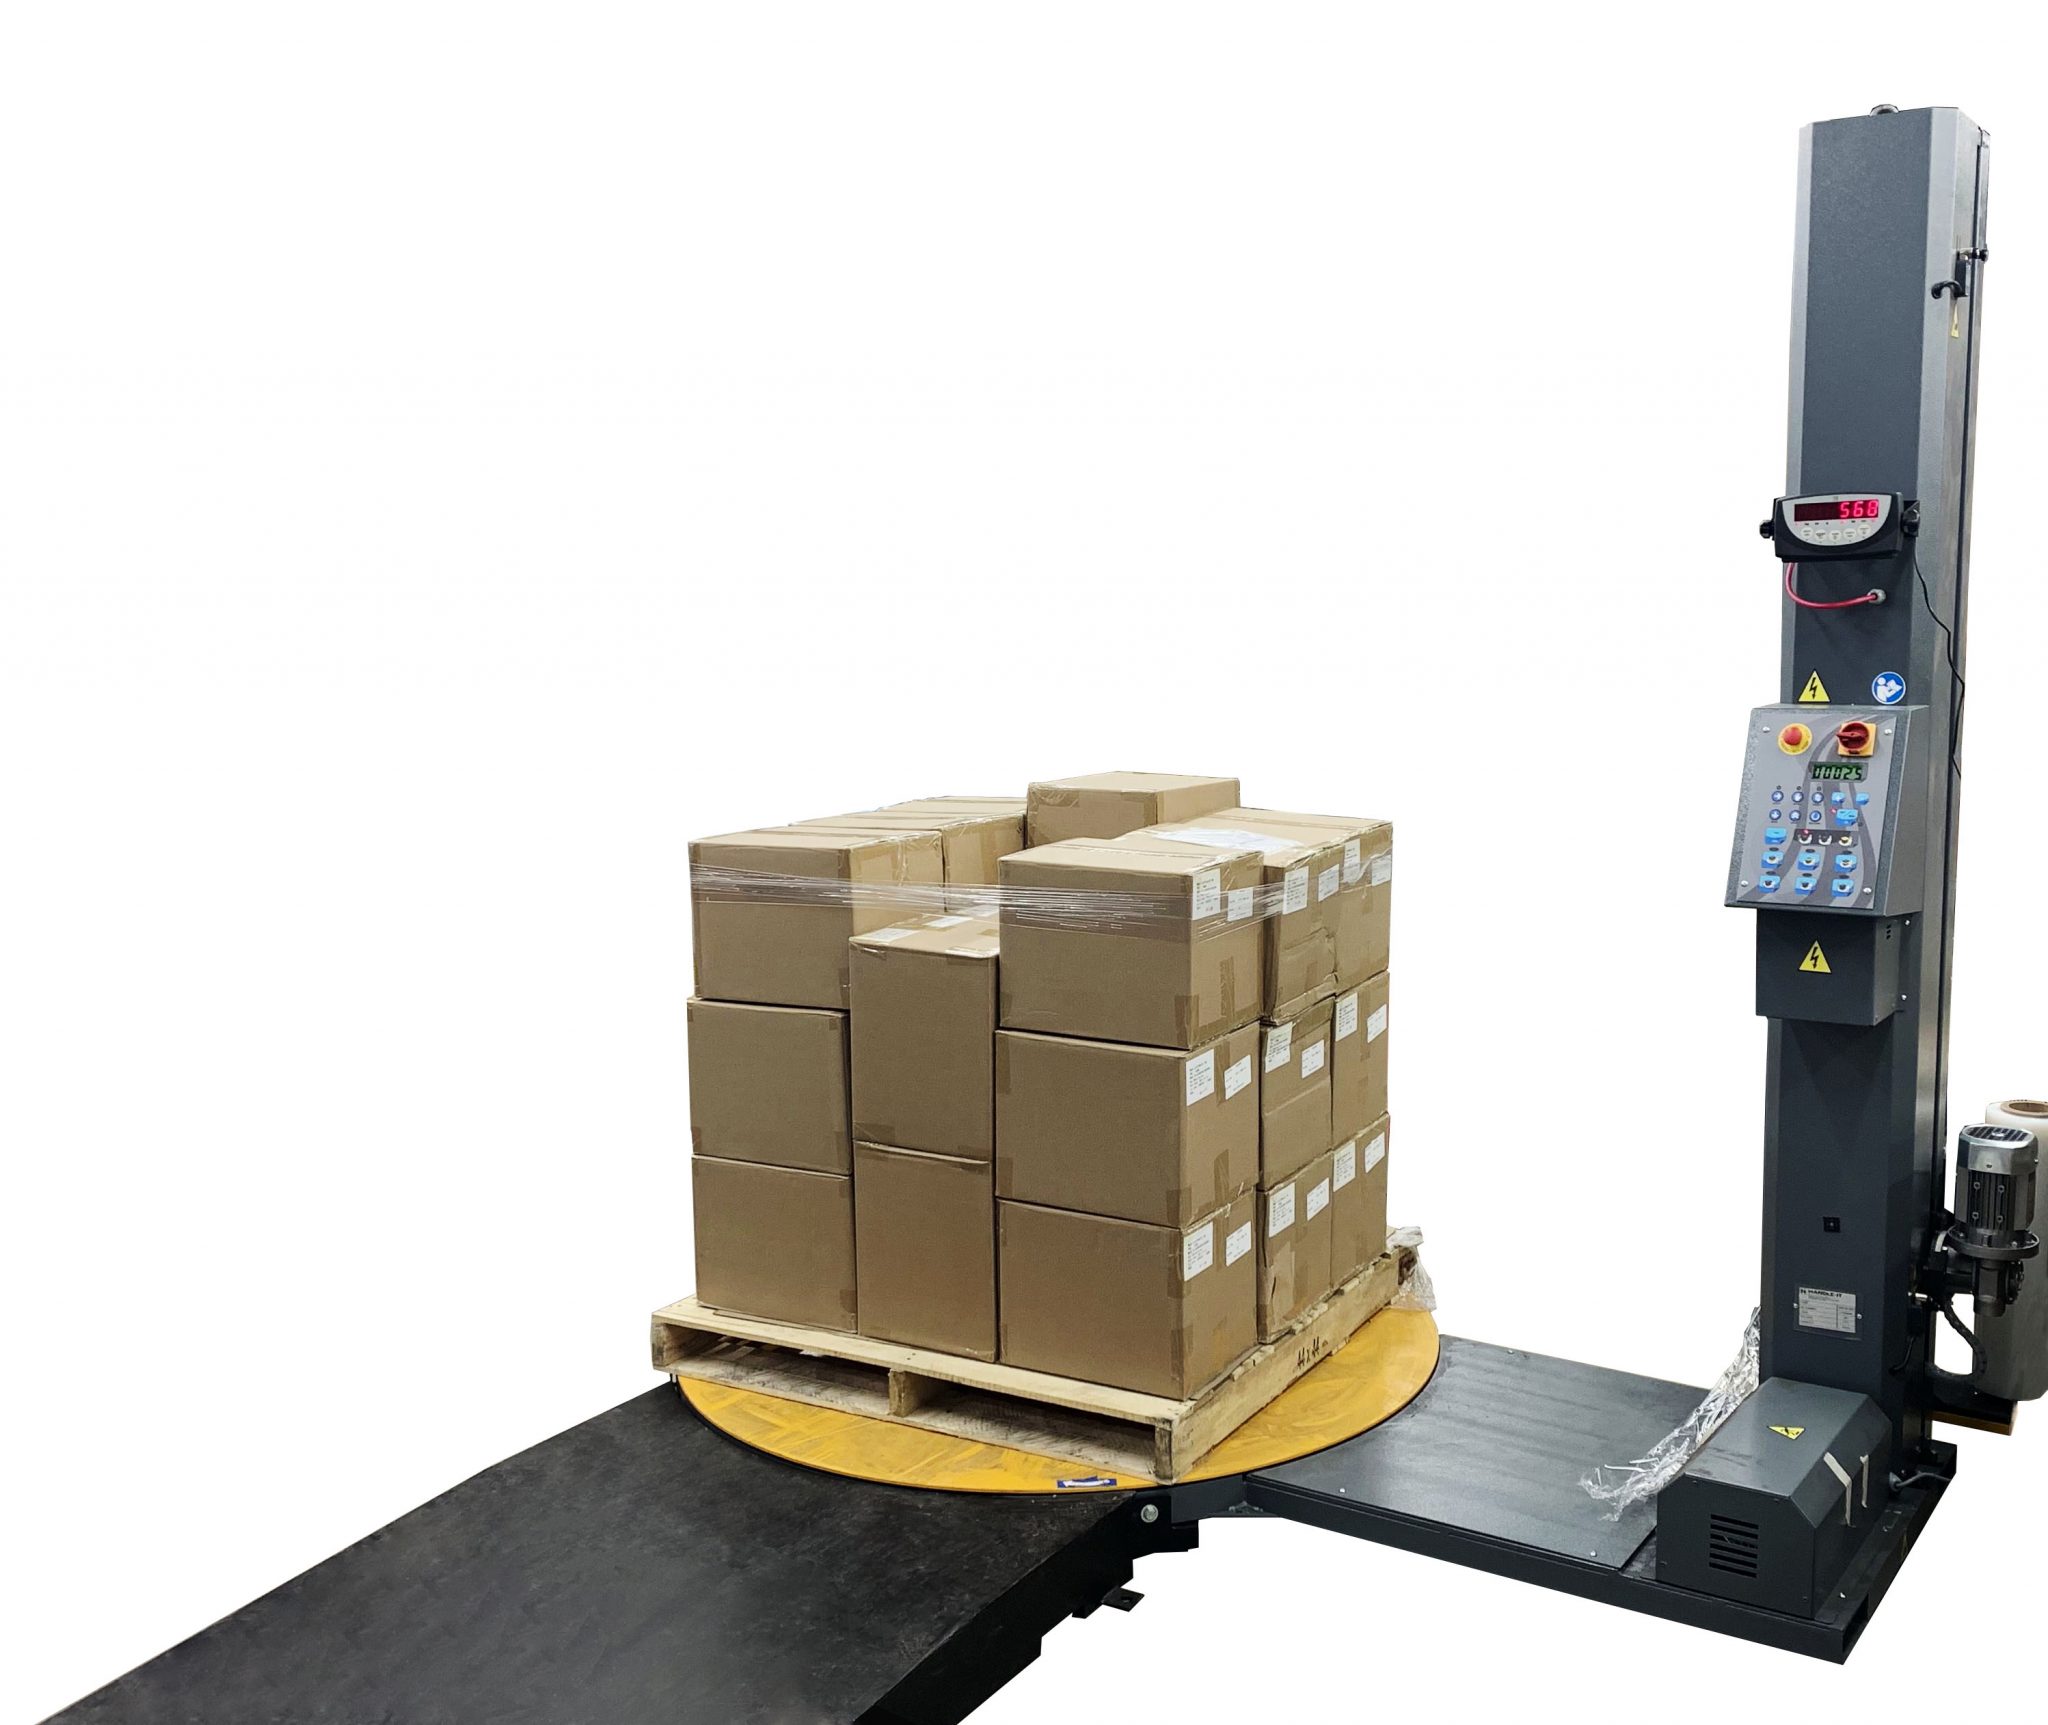 What are the most common pallet wrapping mistakes and how to avoid them